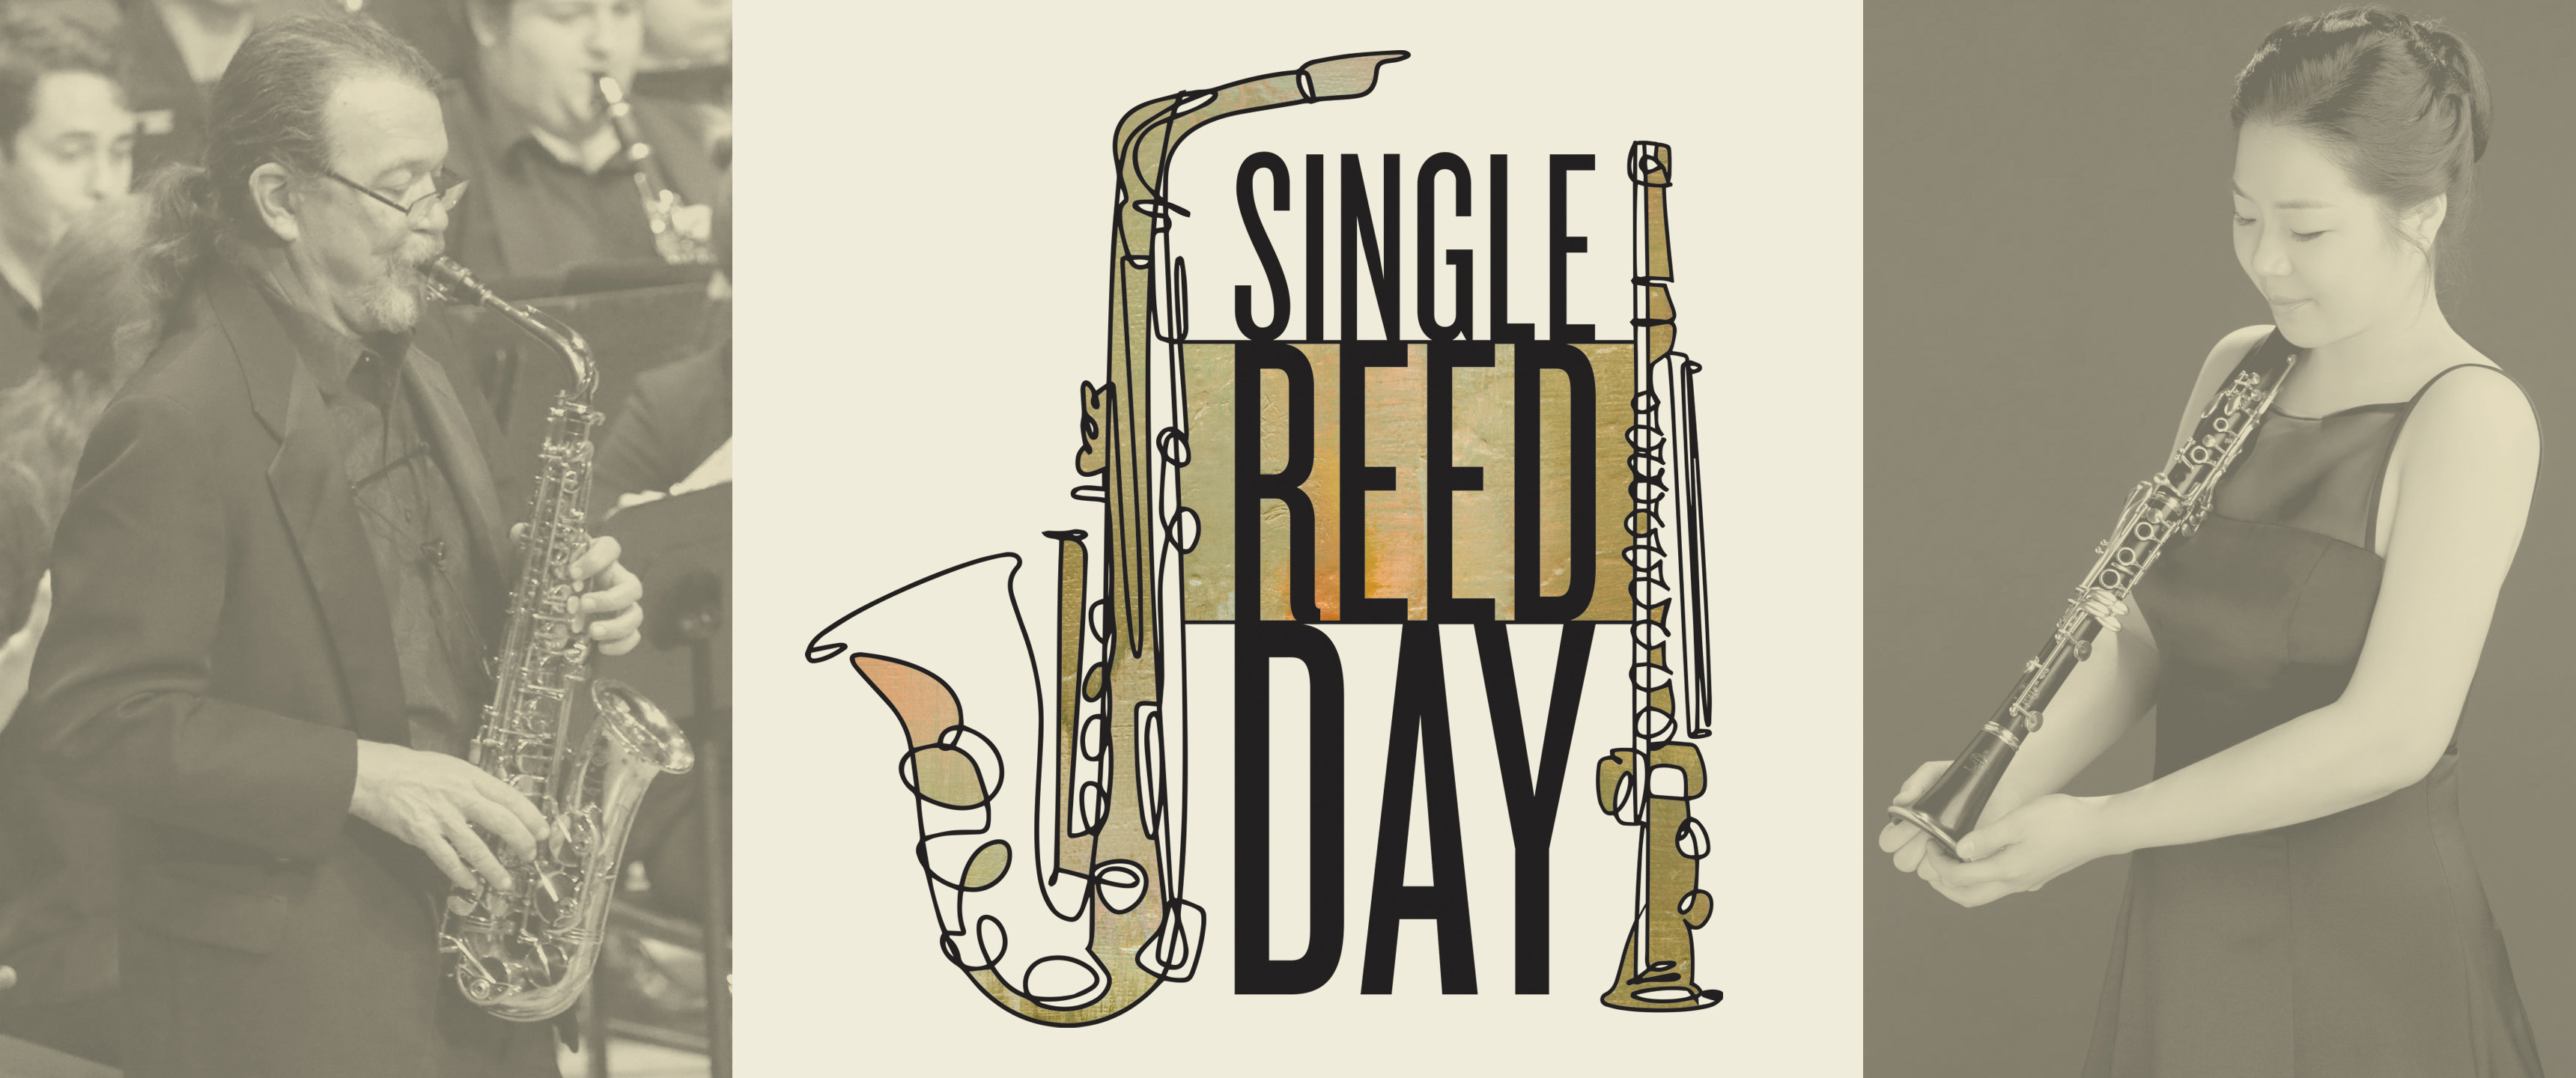 single reed day